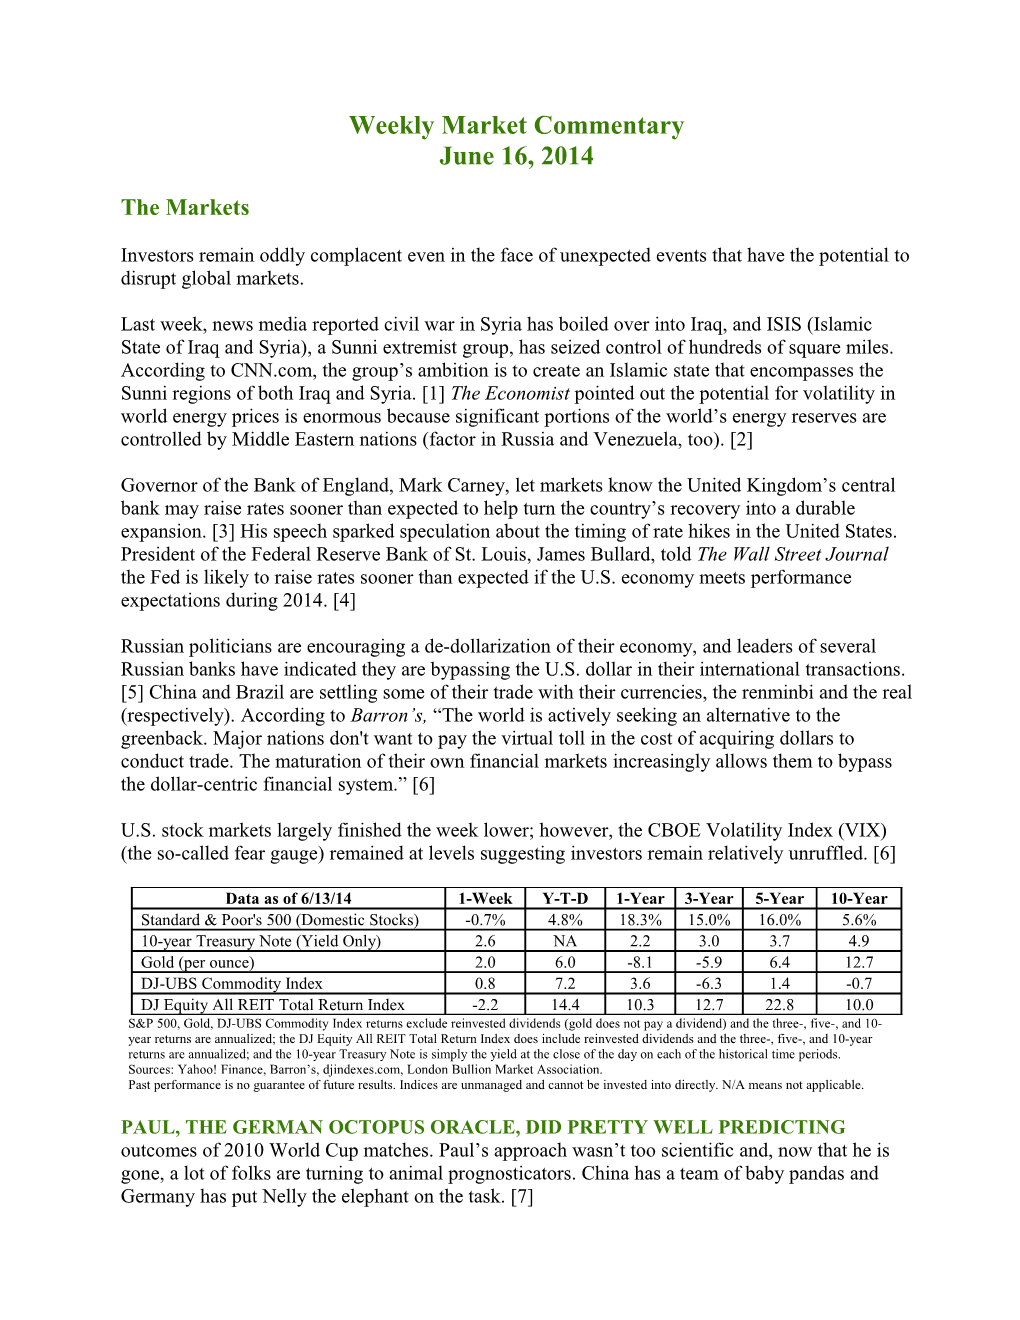 Weekly Commentary 06-16-14 PAA